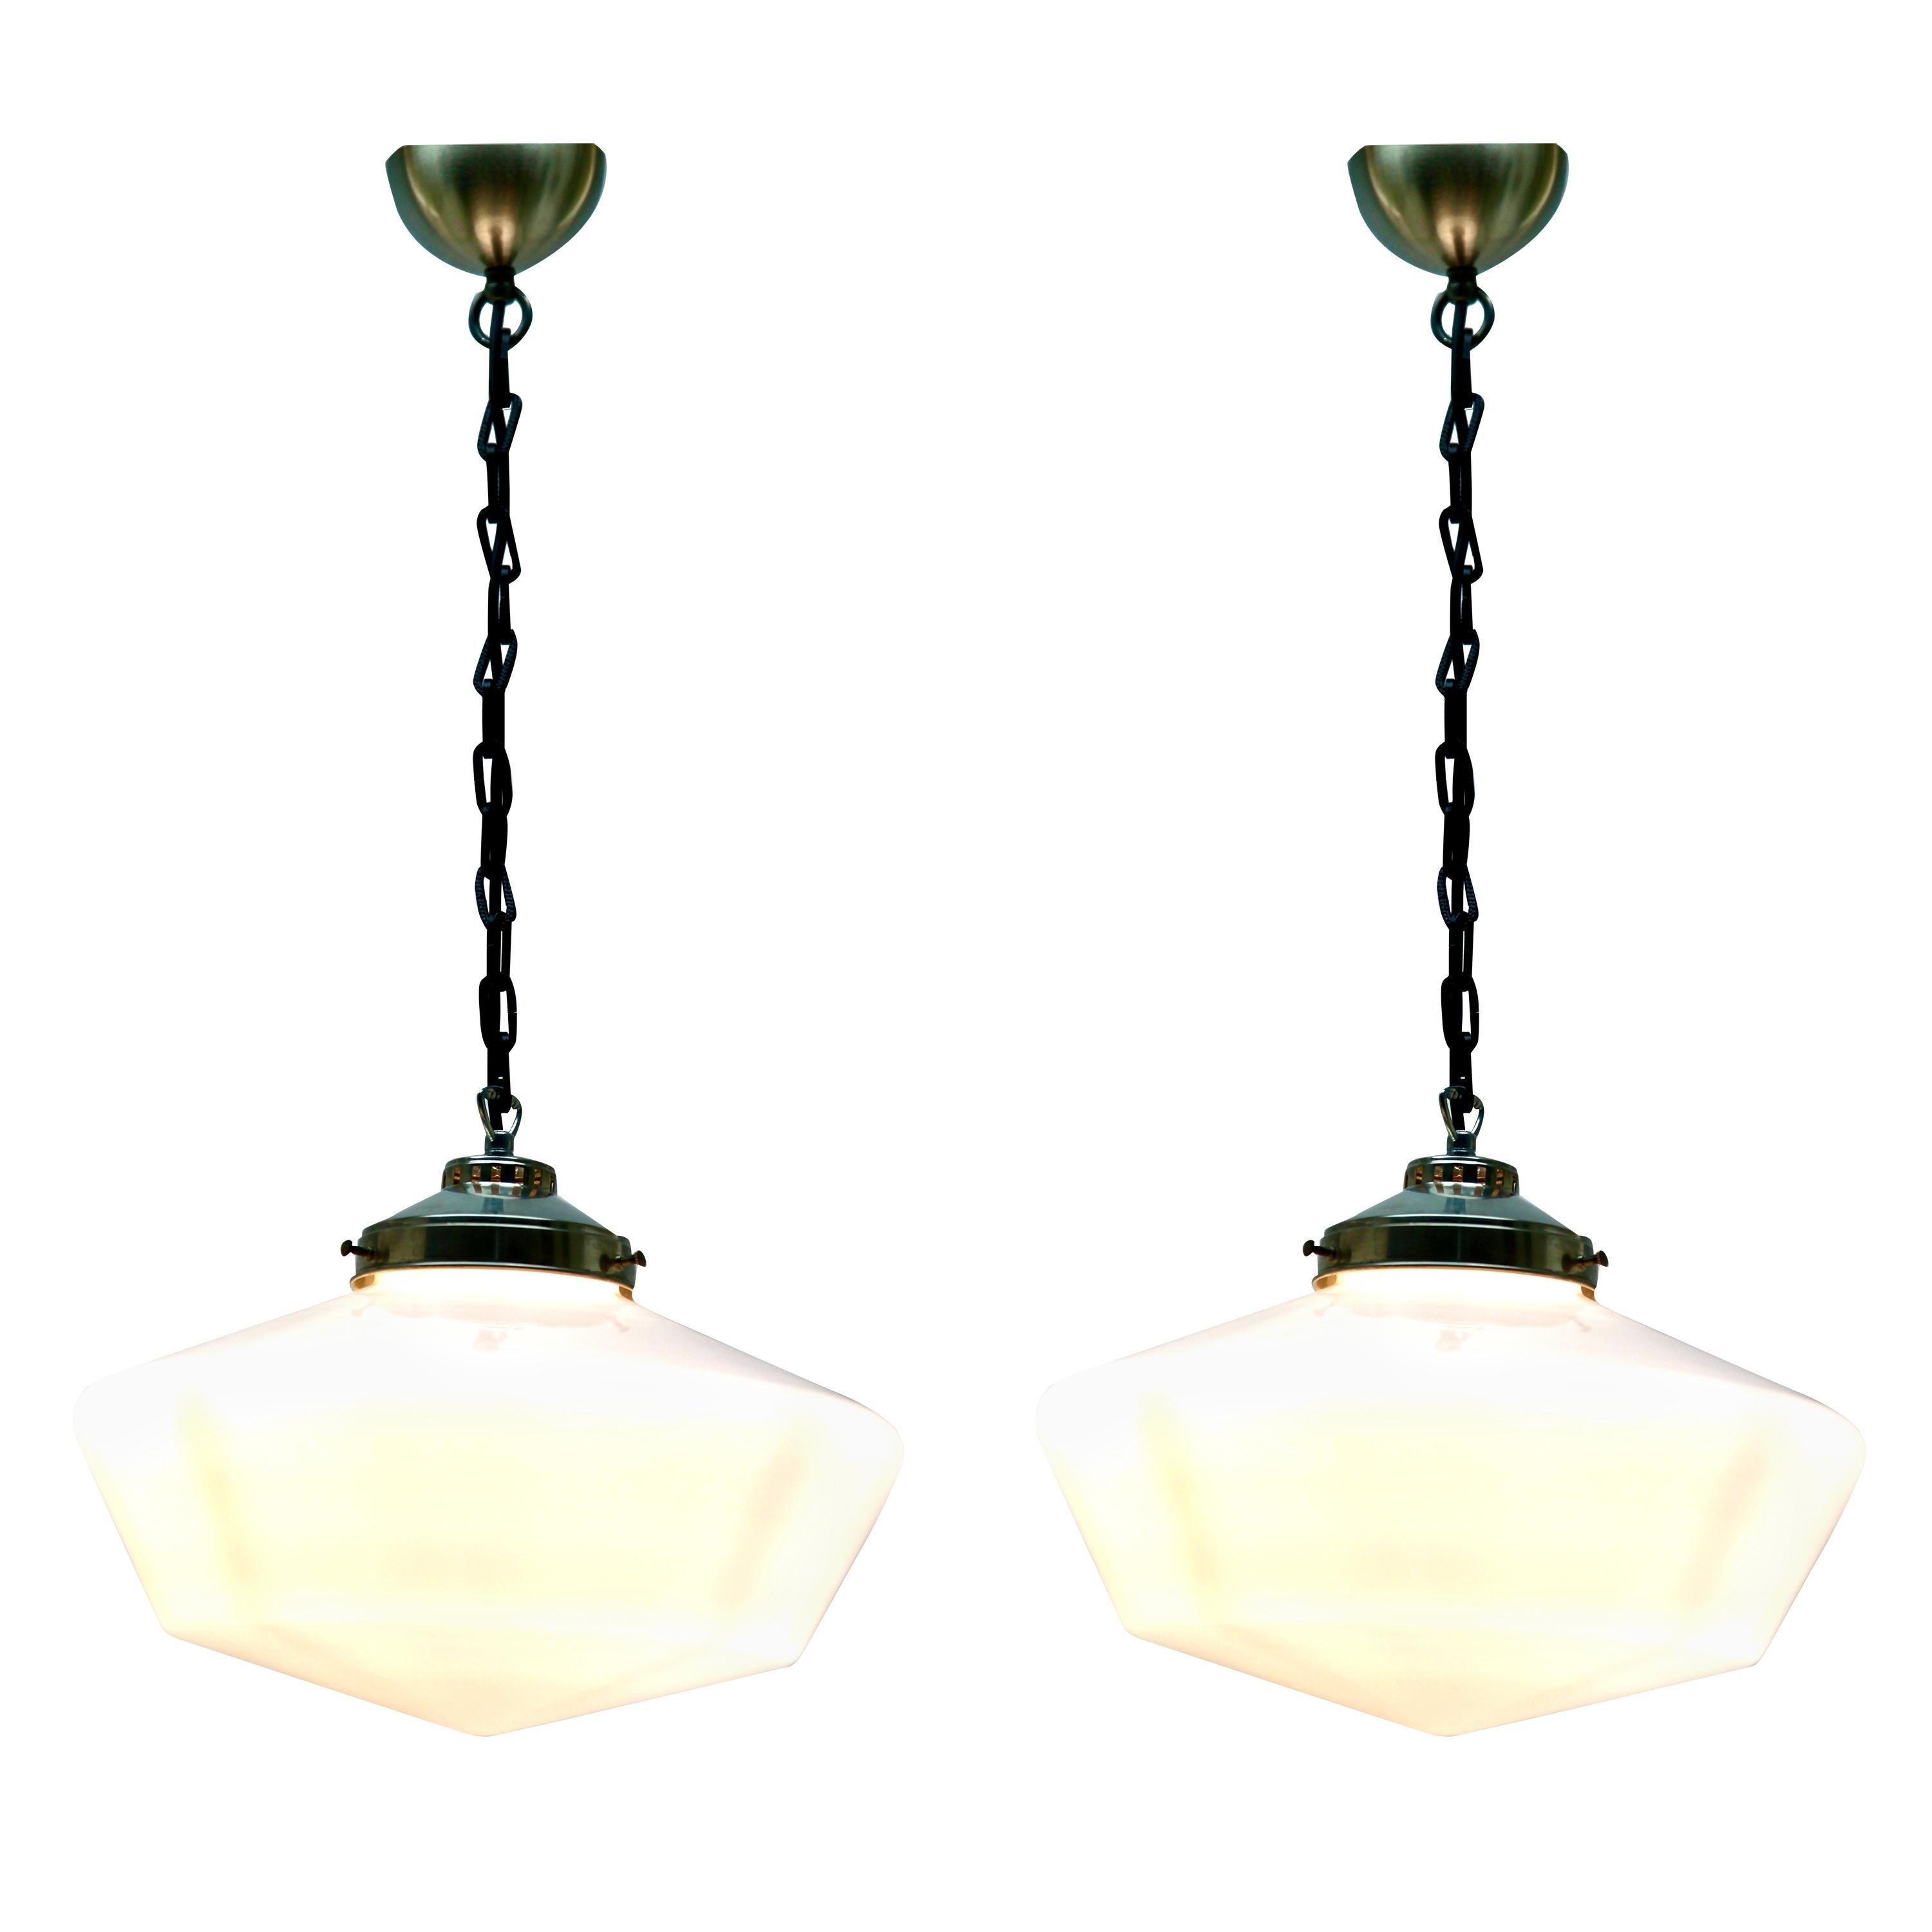 Midcentury Set of Pendant Lights, with Optical Opaline Shade